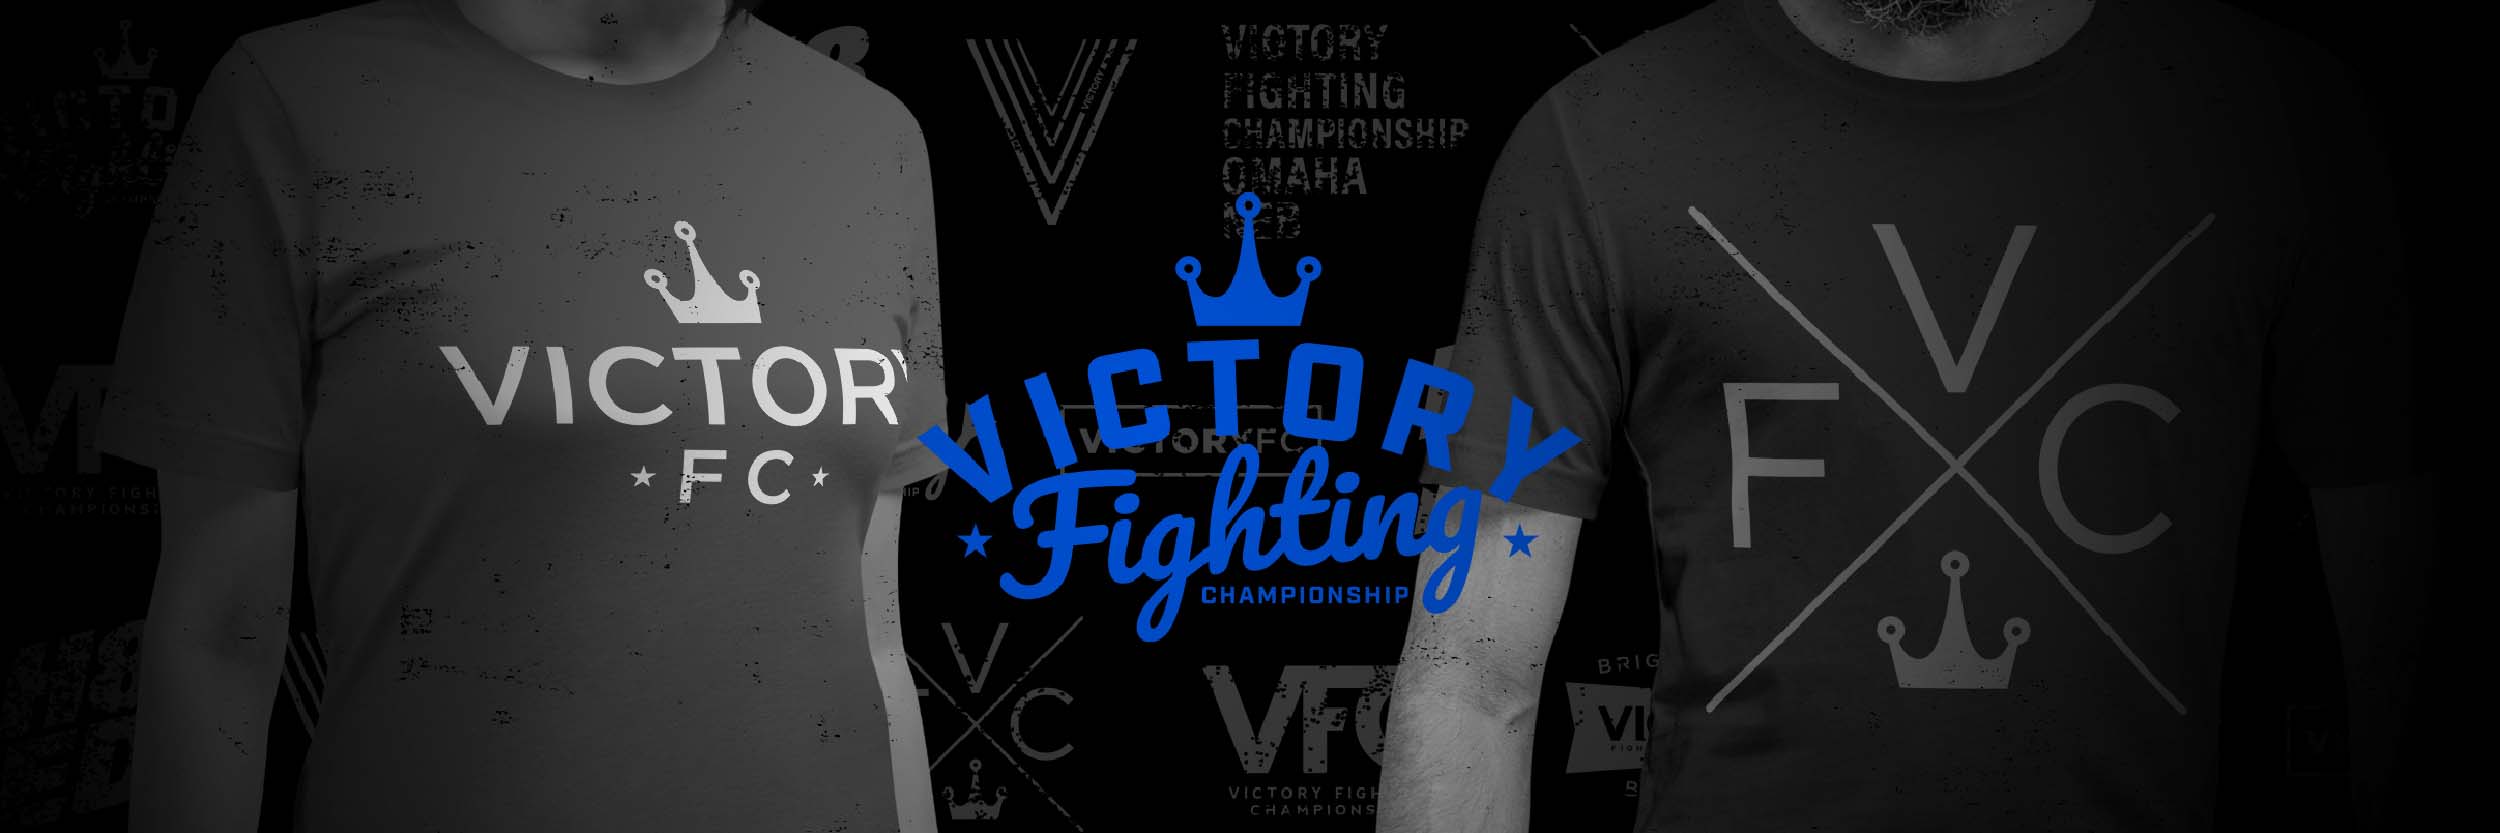 Victory Fighting Championship t-shirt background blue